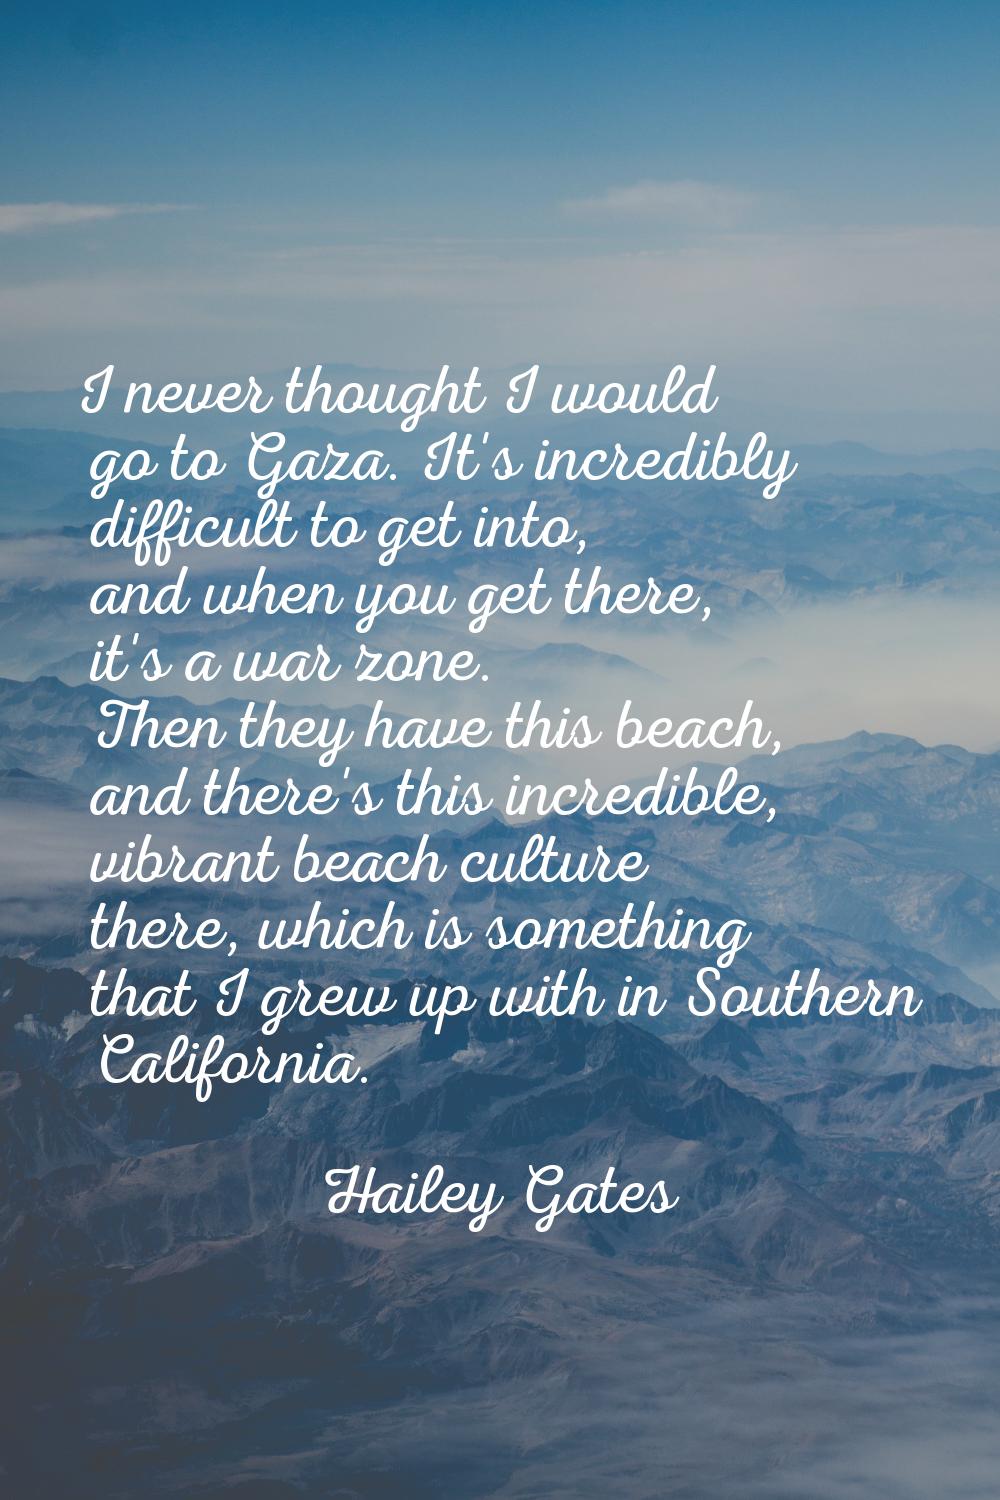 I never thought I would go to Gaza. It's incredibly difficult to get into, and when you get there, 